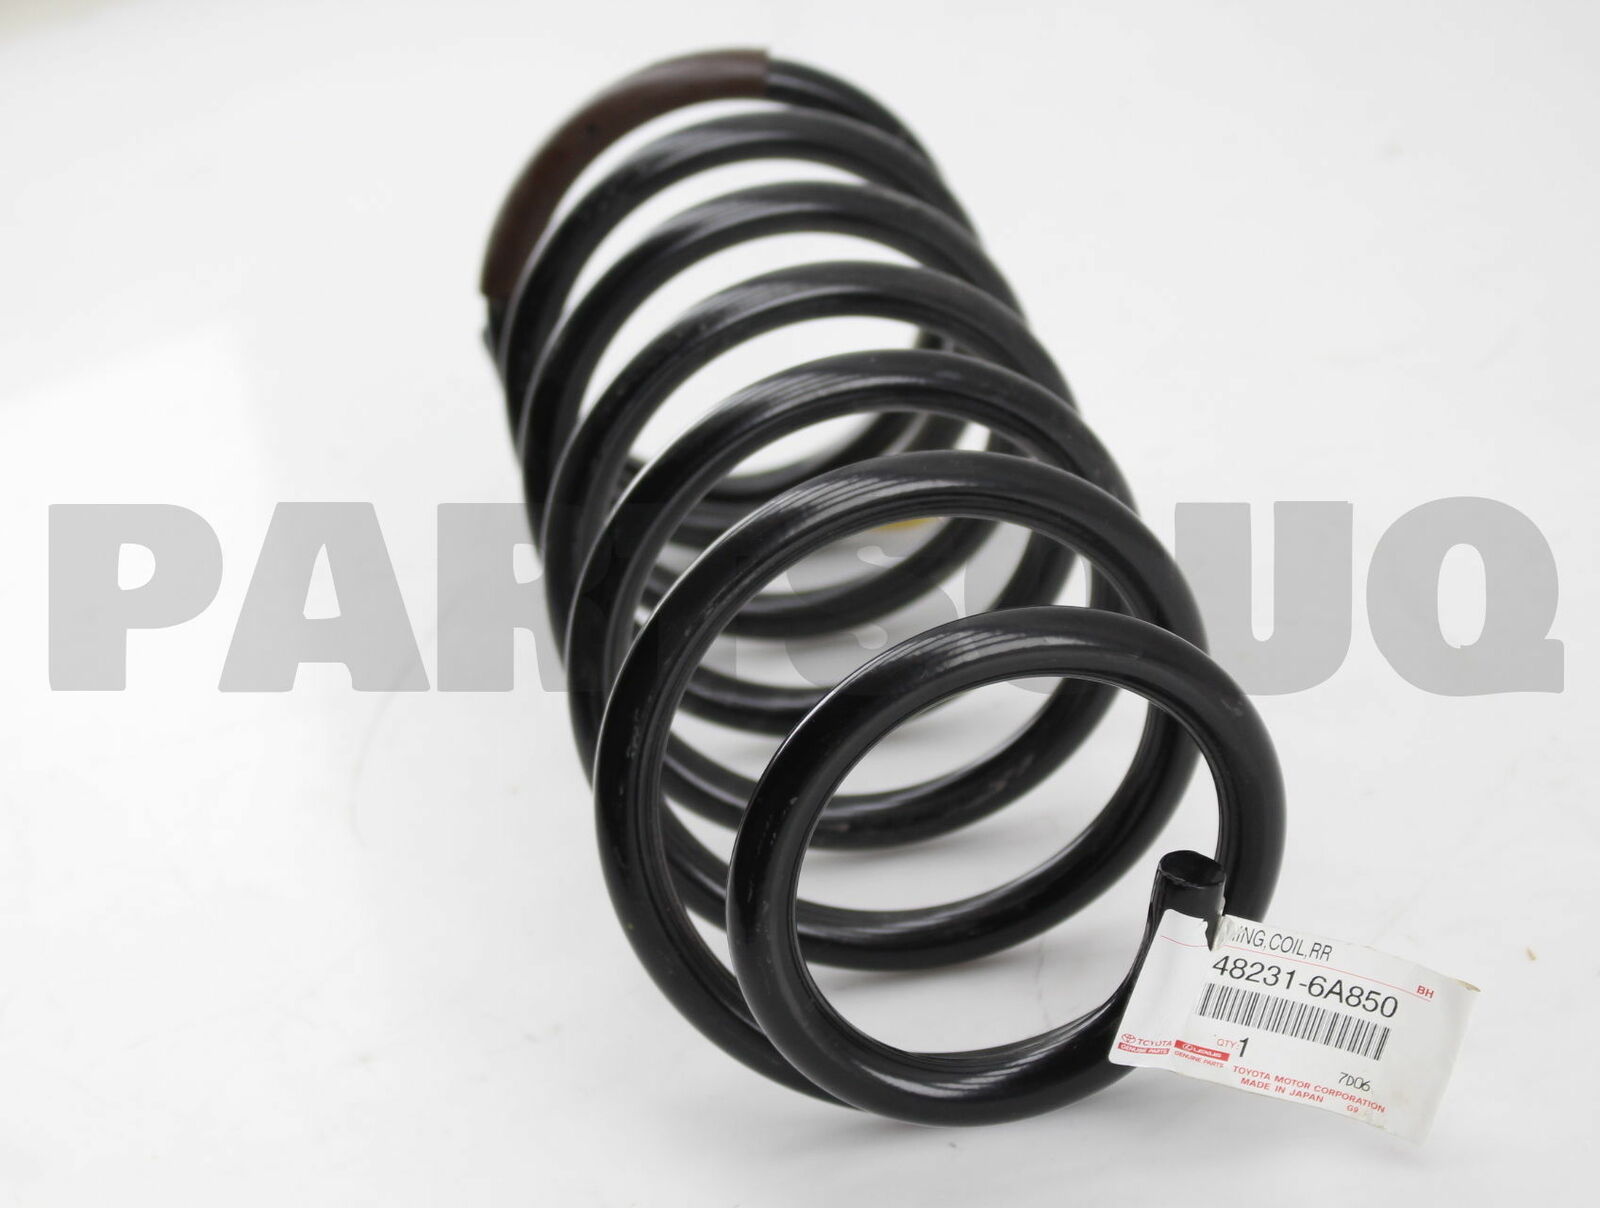 Next time replacing rear saggy coils see if you can get the Prado coils-48231-6a850-tlc95-bench-seats-90-70l-fuel-tanks-jpg